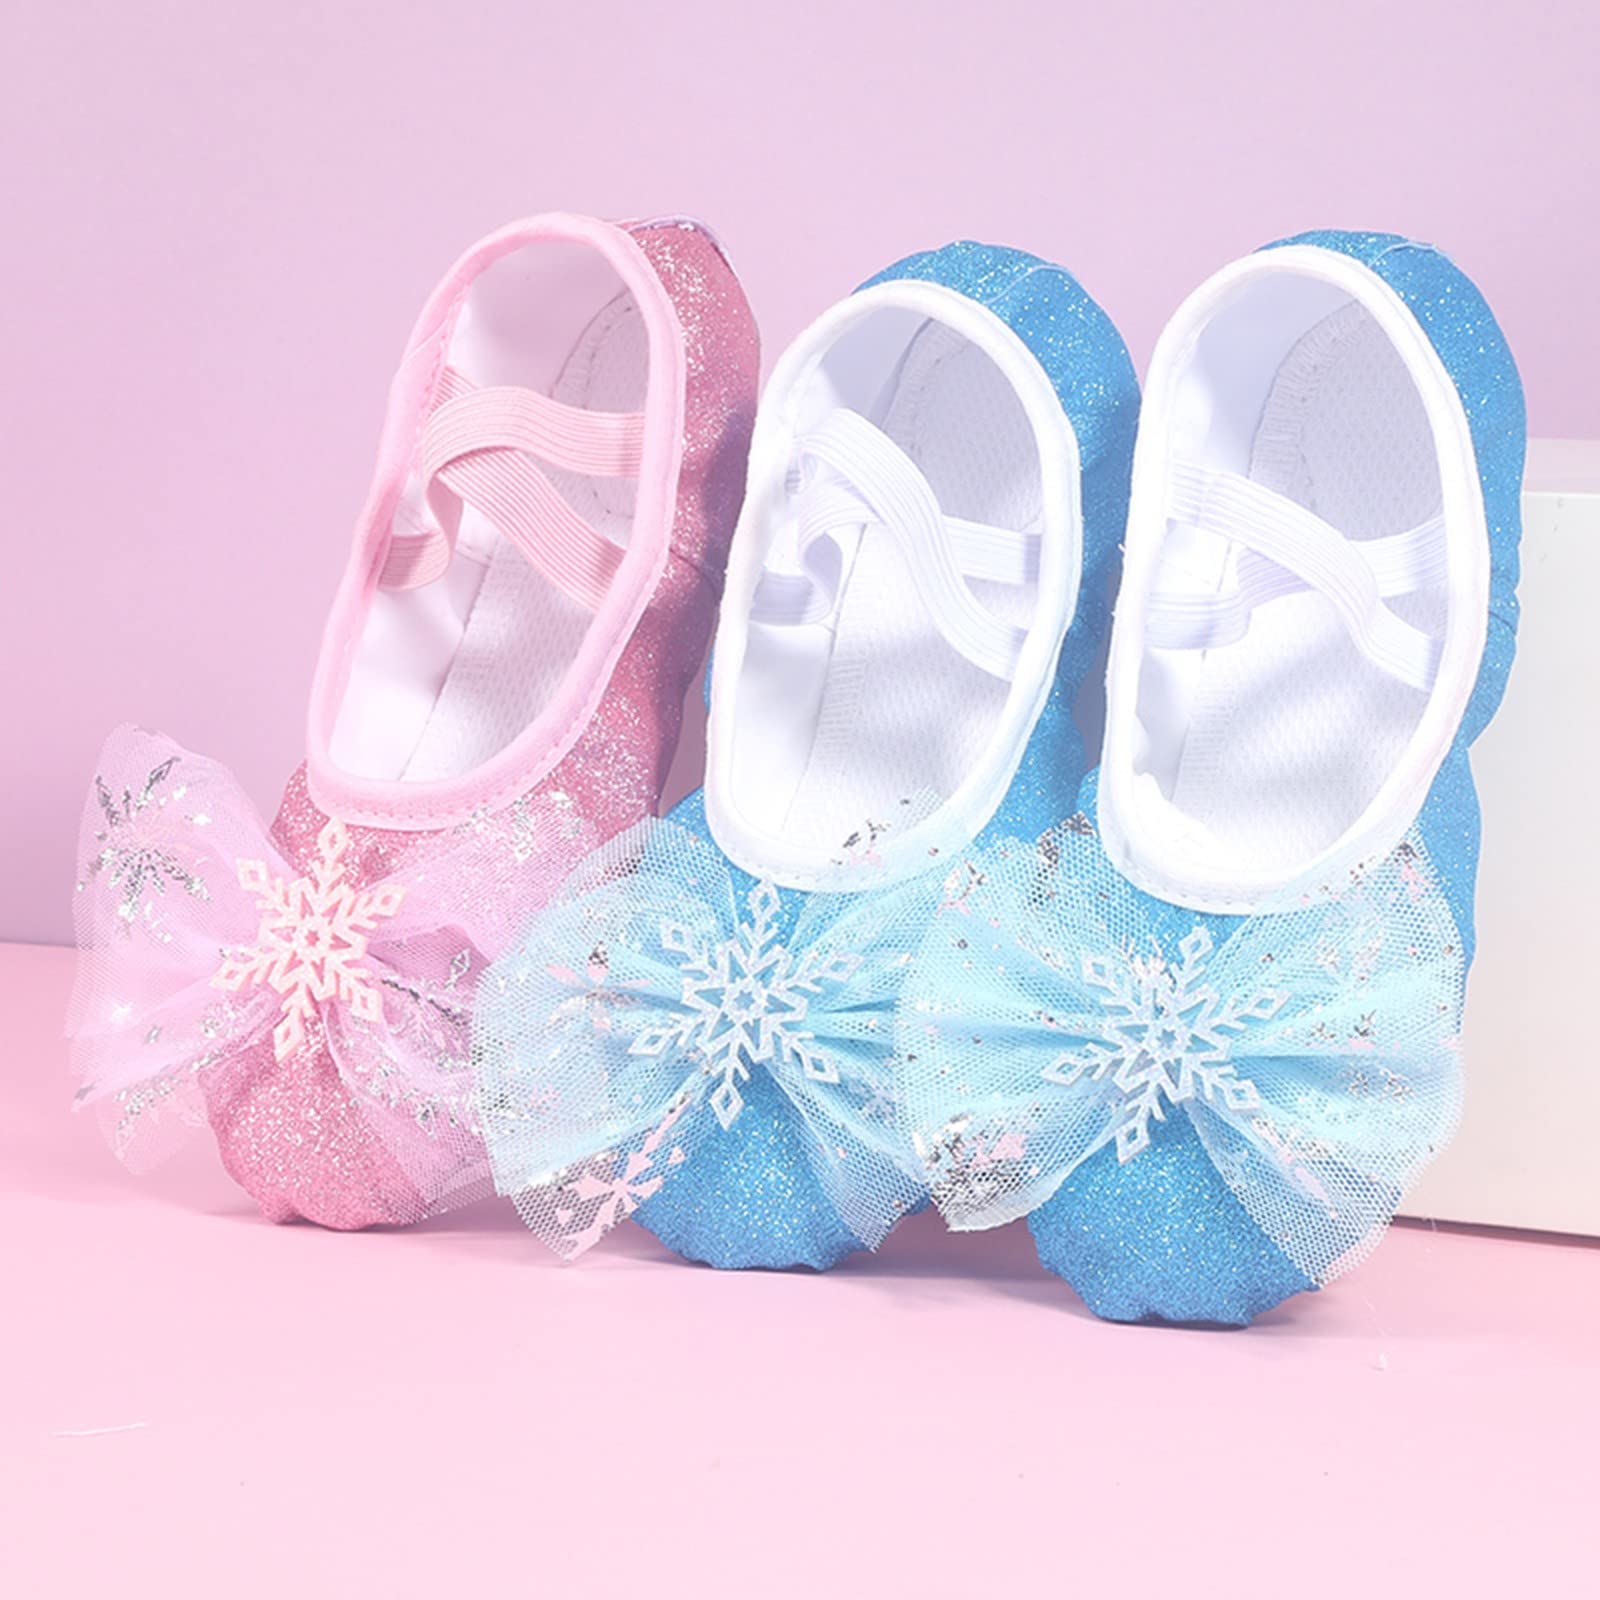 TODOZO Children Shoes Dance Shoes Warm Dance Ballet Performance Indoor Shoes Yoga Dance Shoes Kids Toddler Shoes Girls